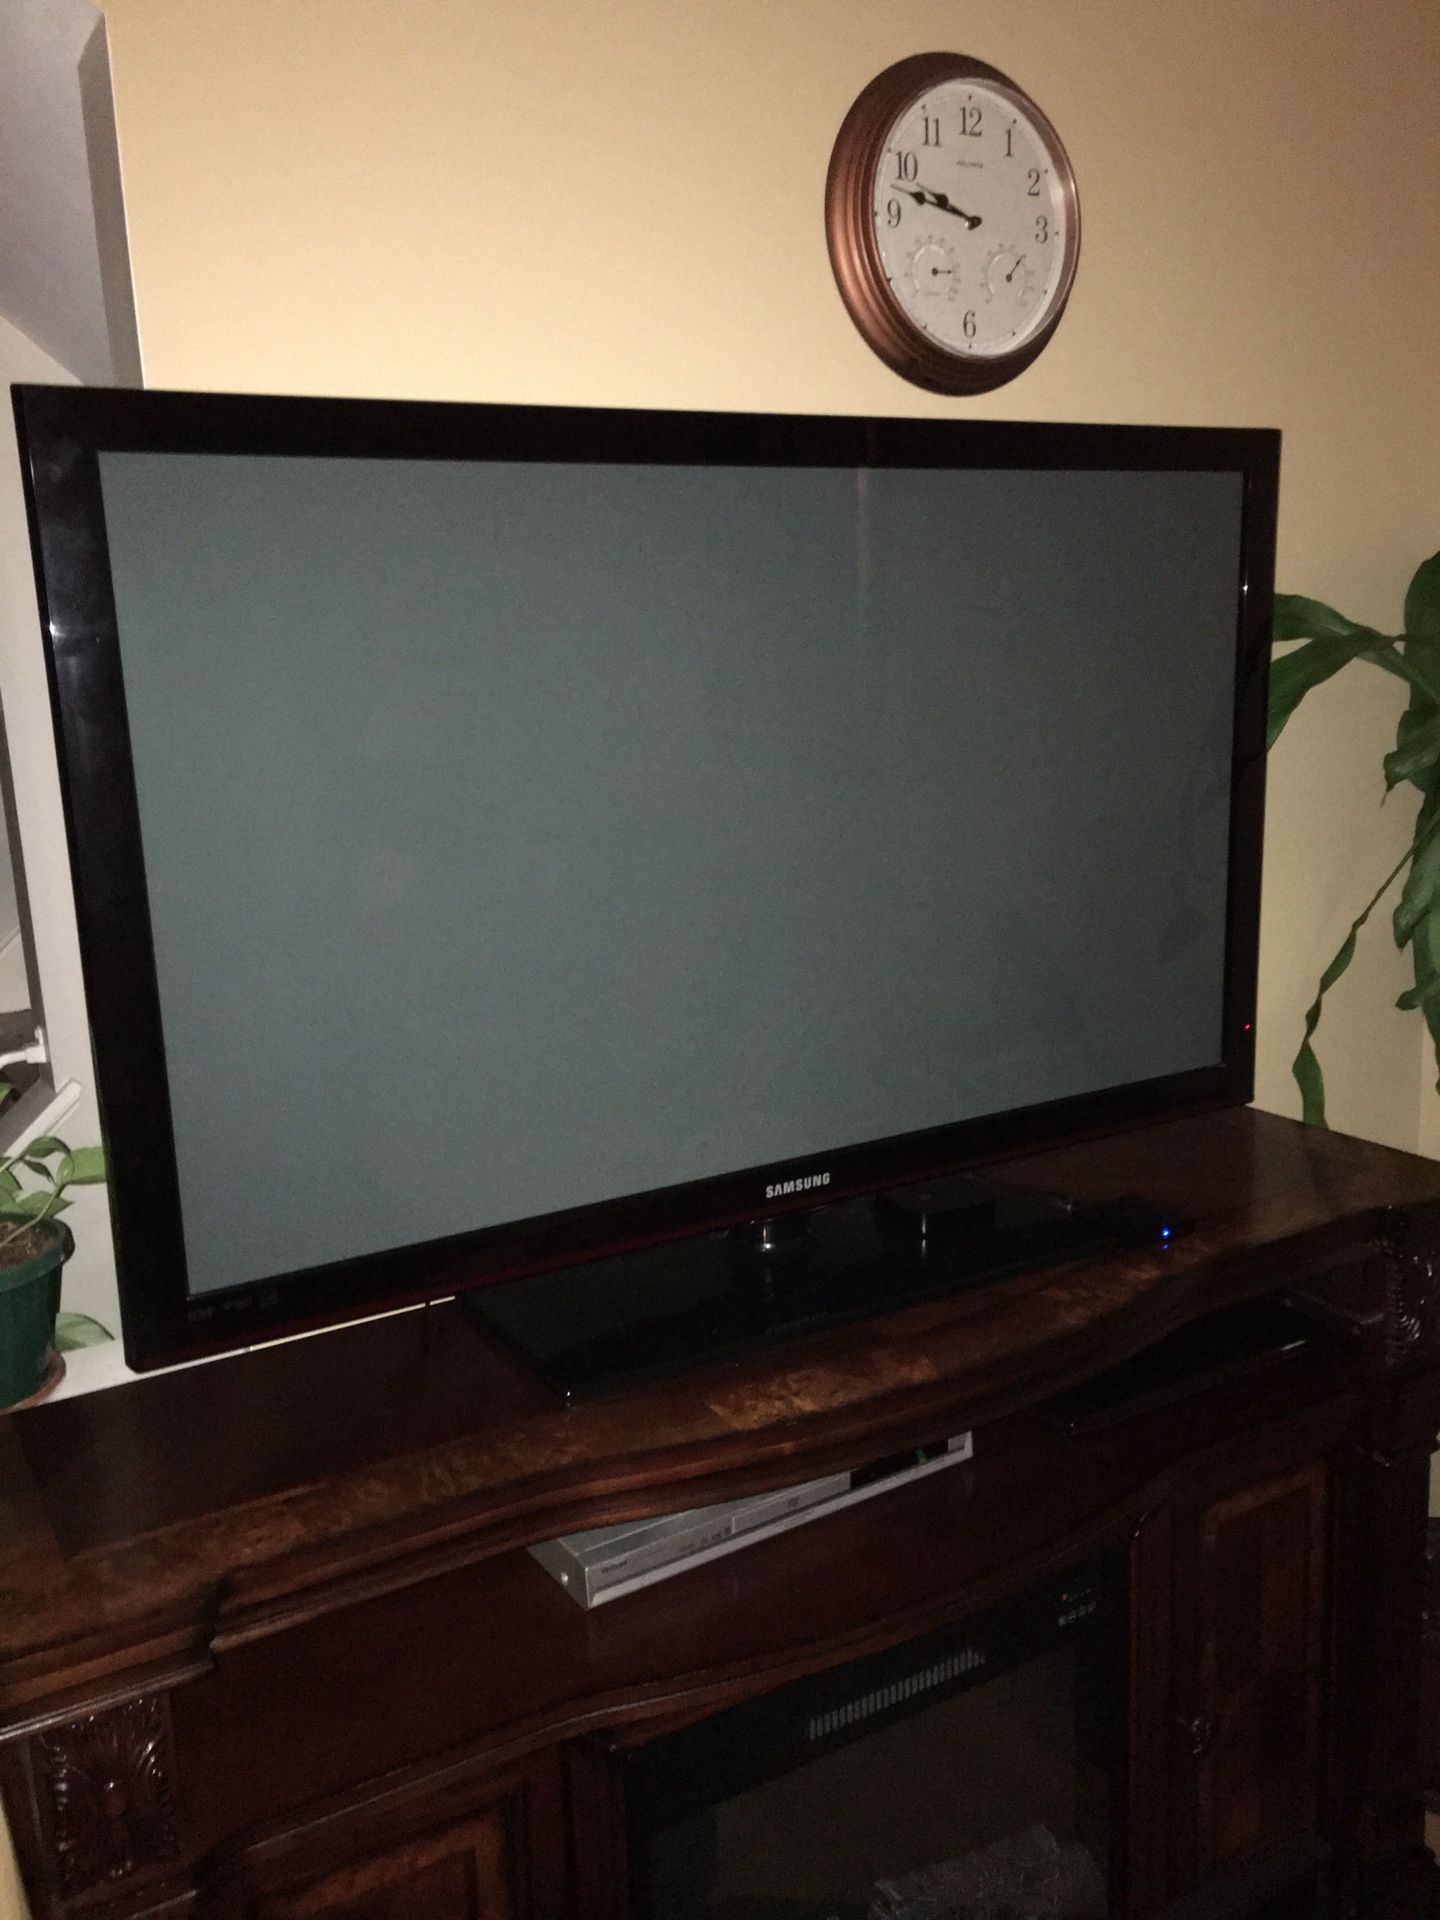 50 inches Sumsung TV not smart tv